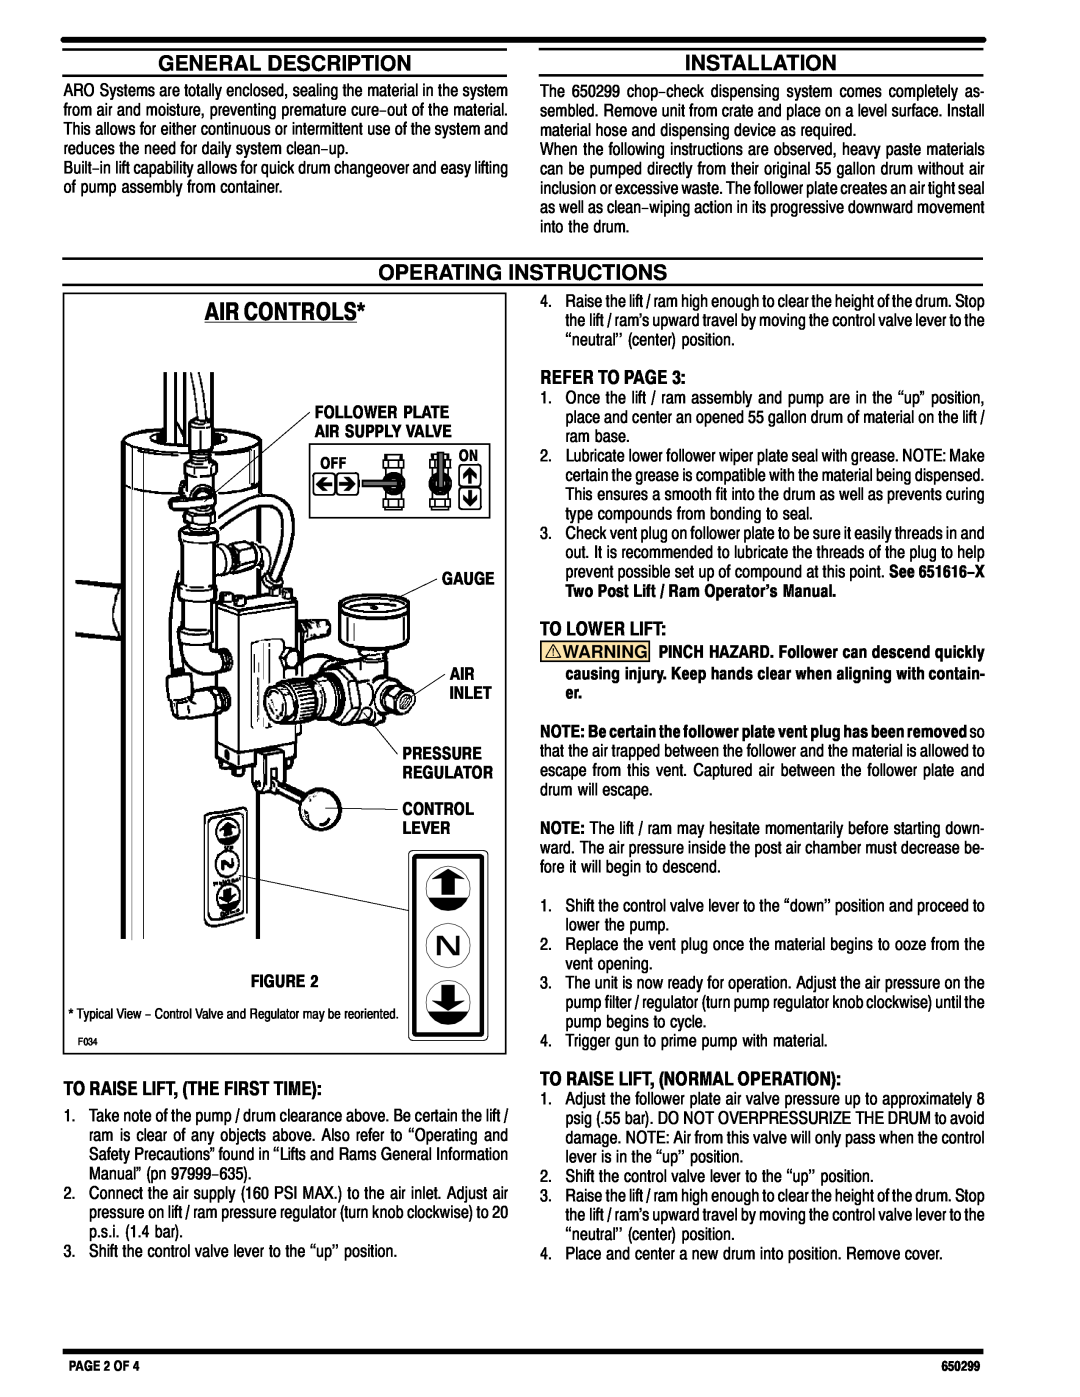 Ingersoll-Rand 650299 specifications General Description, Installation, Operating Instructions, Air Controls, Refer To Page 